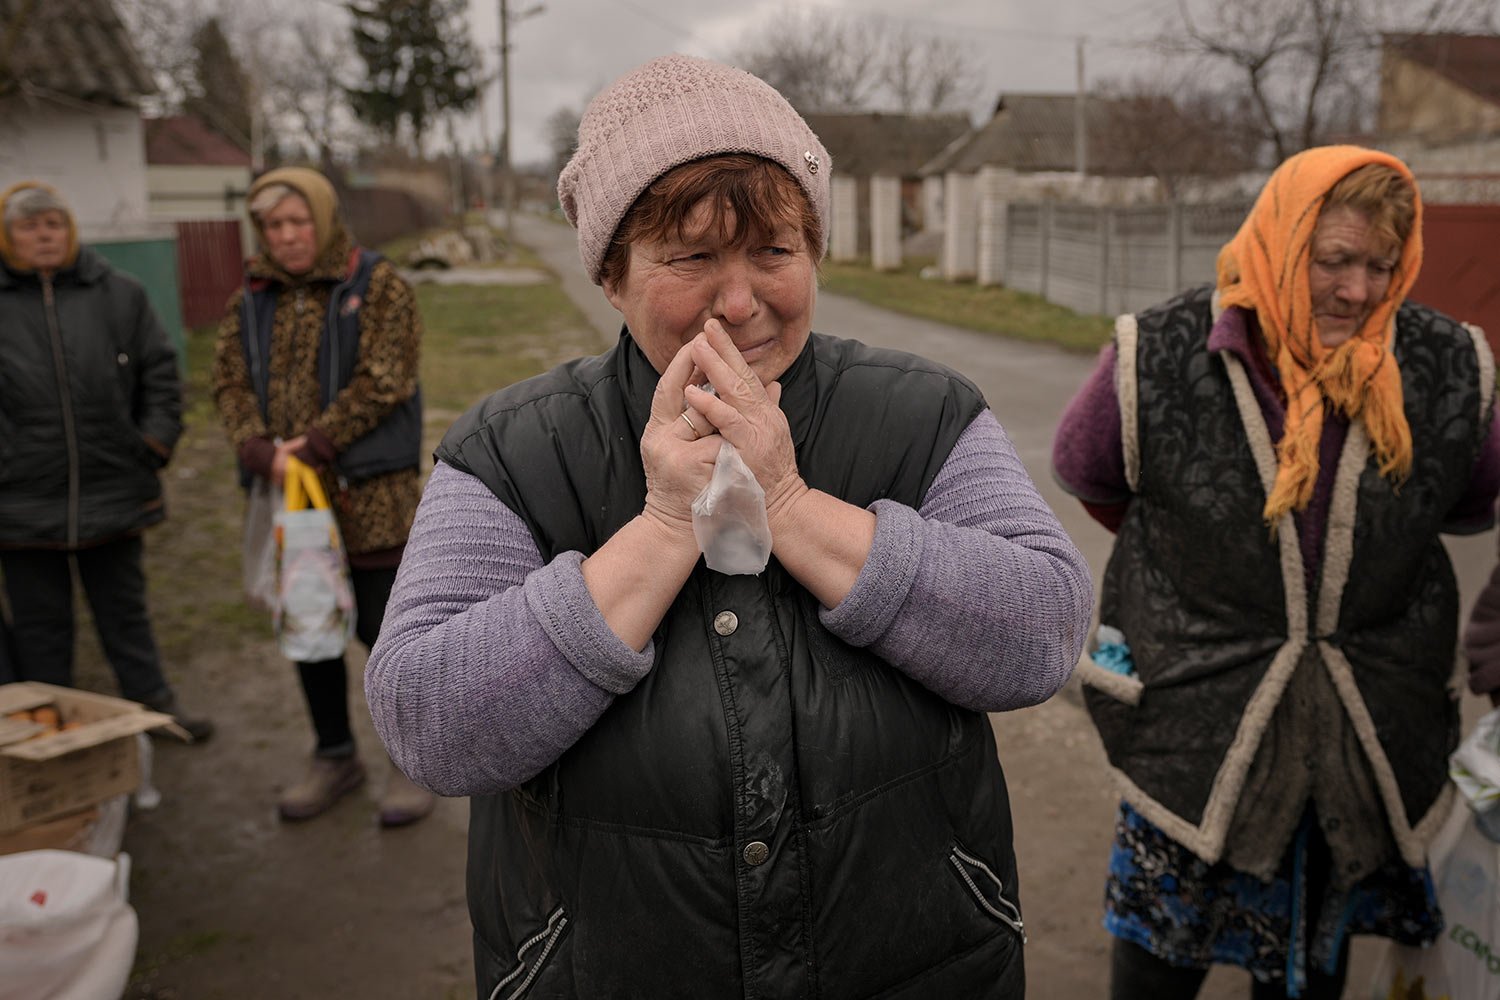  A woman cries while waiting along with others for distribution of food products in the village of Motyzhyn, Ukraine, which was until recently under the control of the Russian military, Sunday, April 3, 2022. (AP Photo/Vadim Ghirda) 